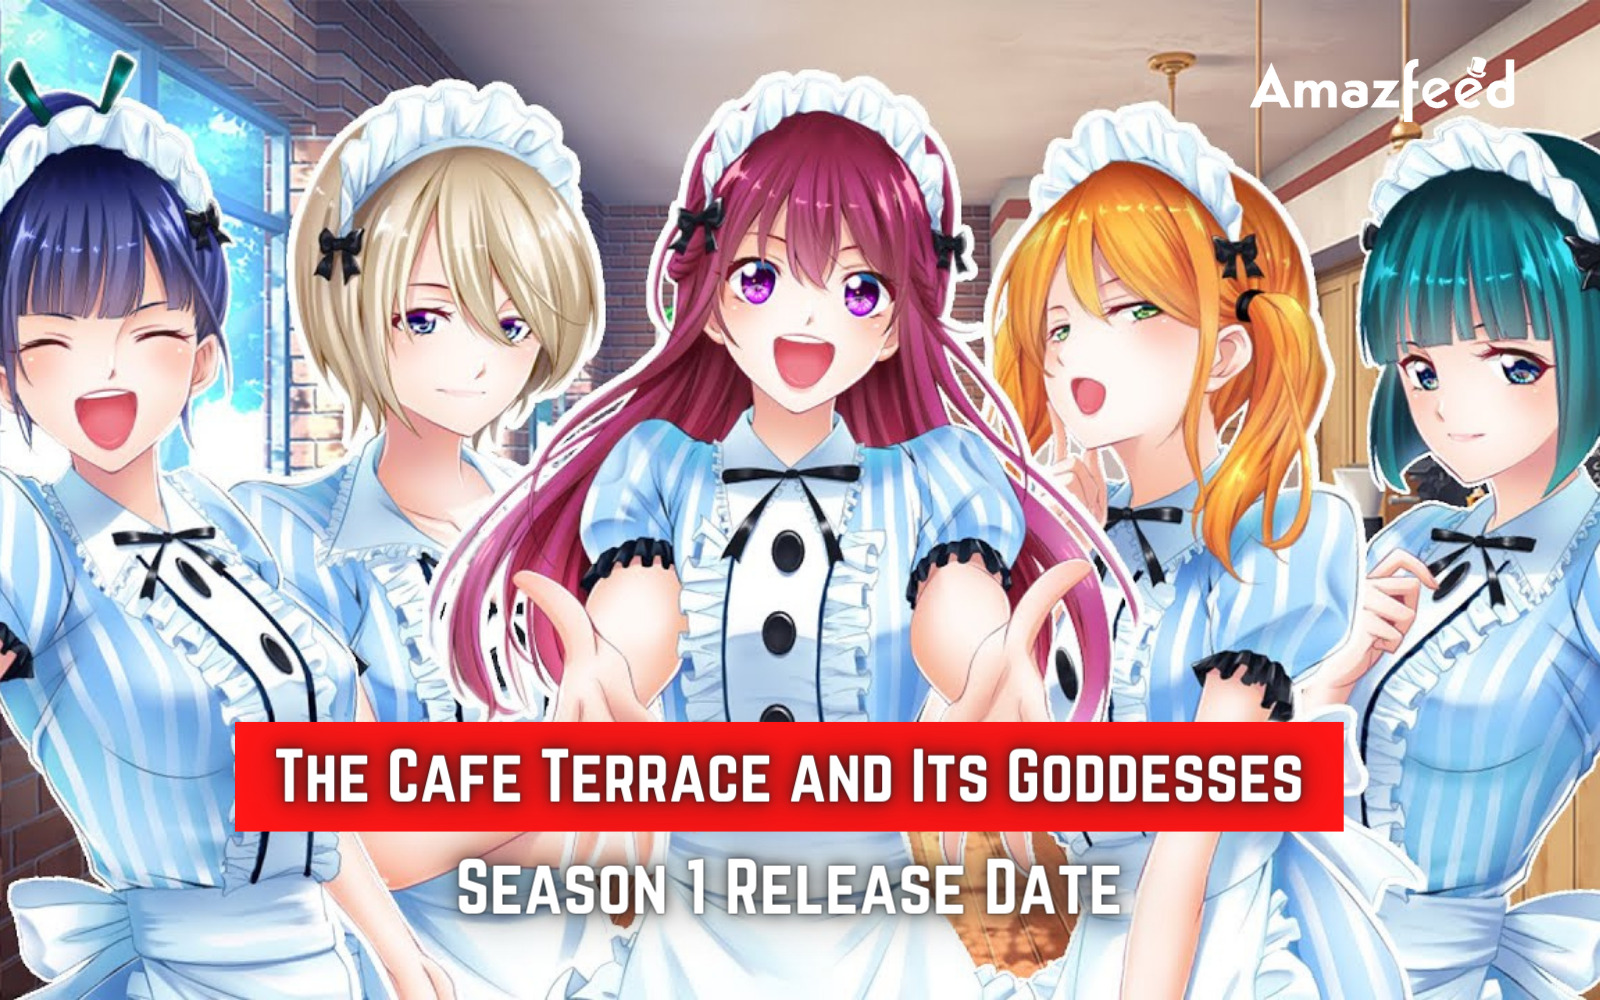 The Cafe Terrace and Its Goddesses' Cast & Staff